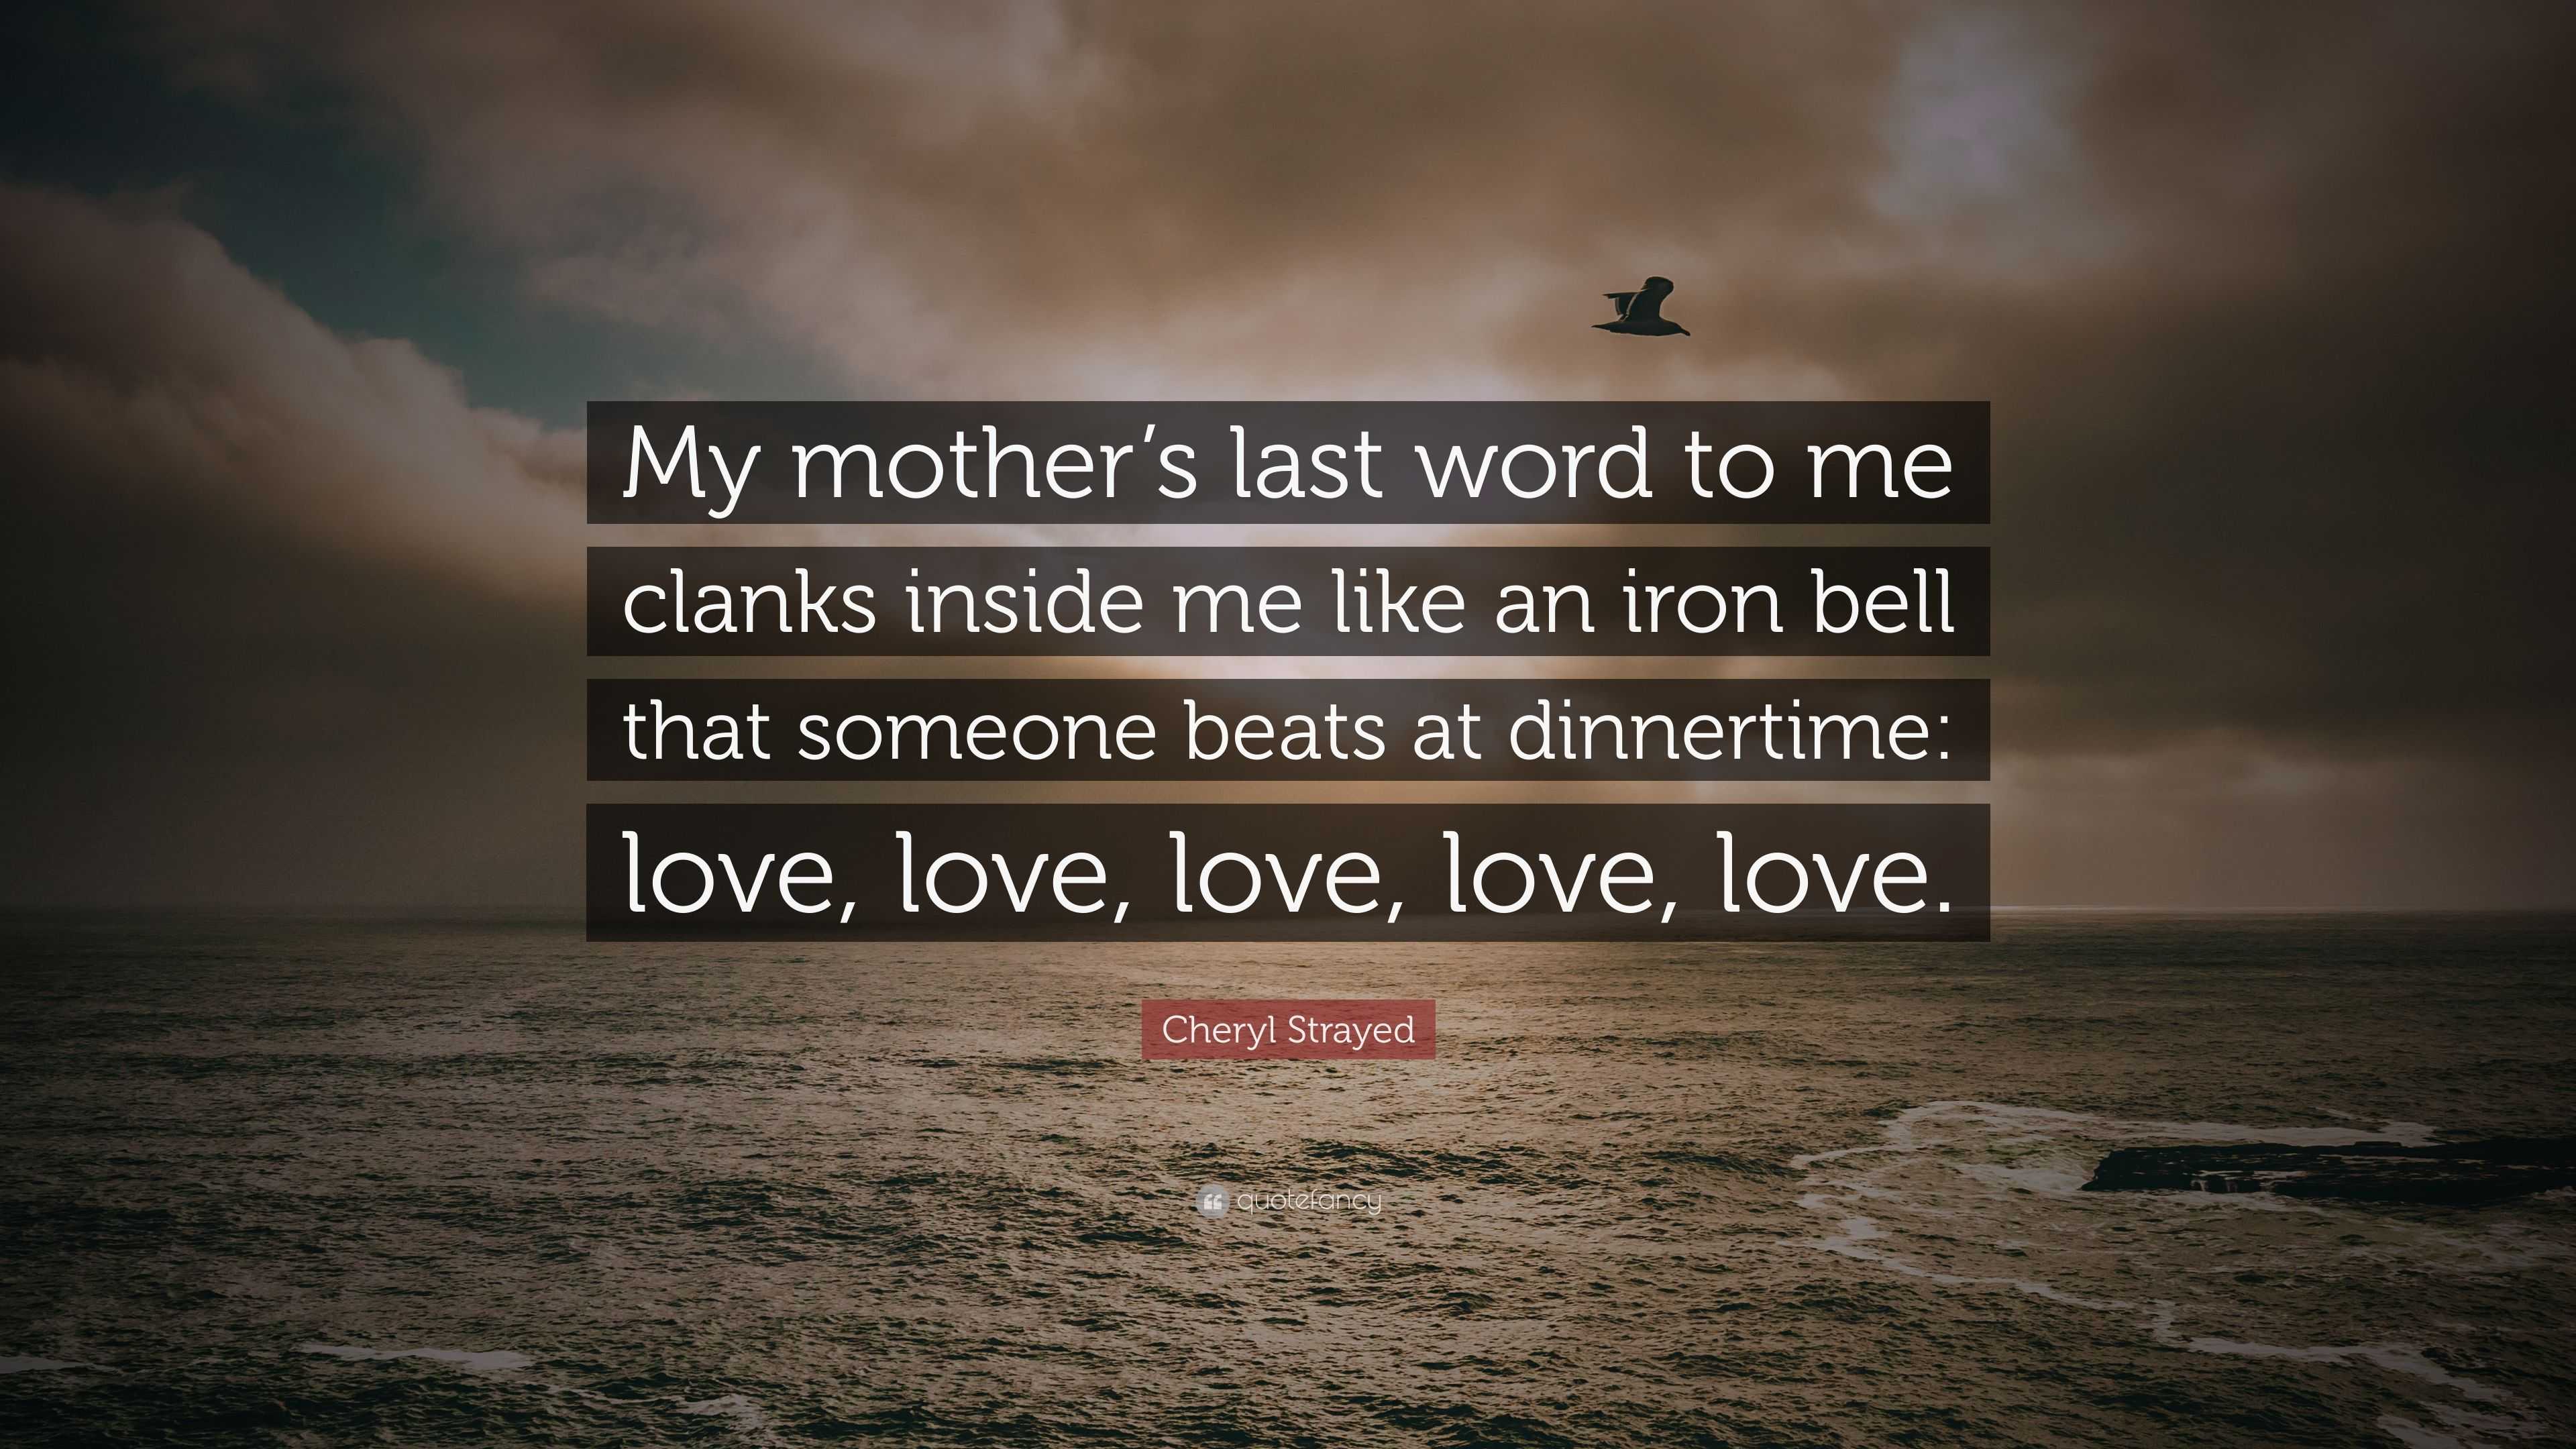 Cheryl Strayed Quote: “My mother’s last word to me clanks inside me ...